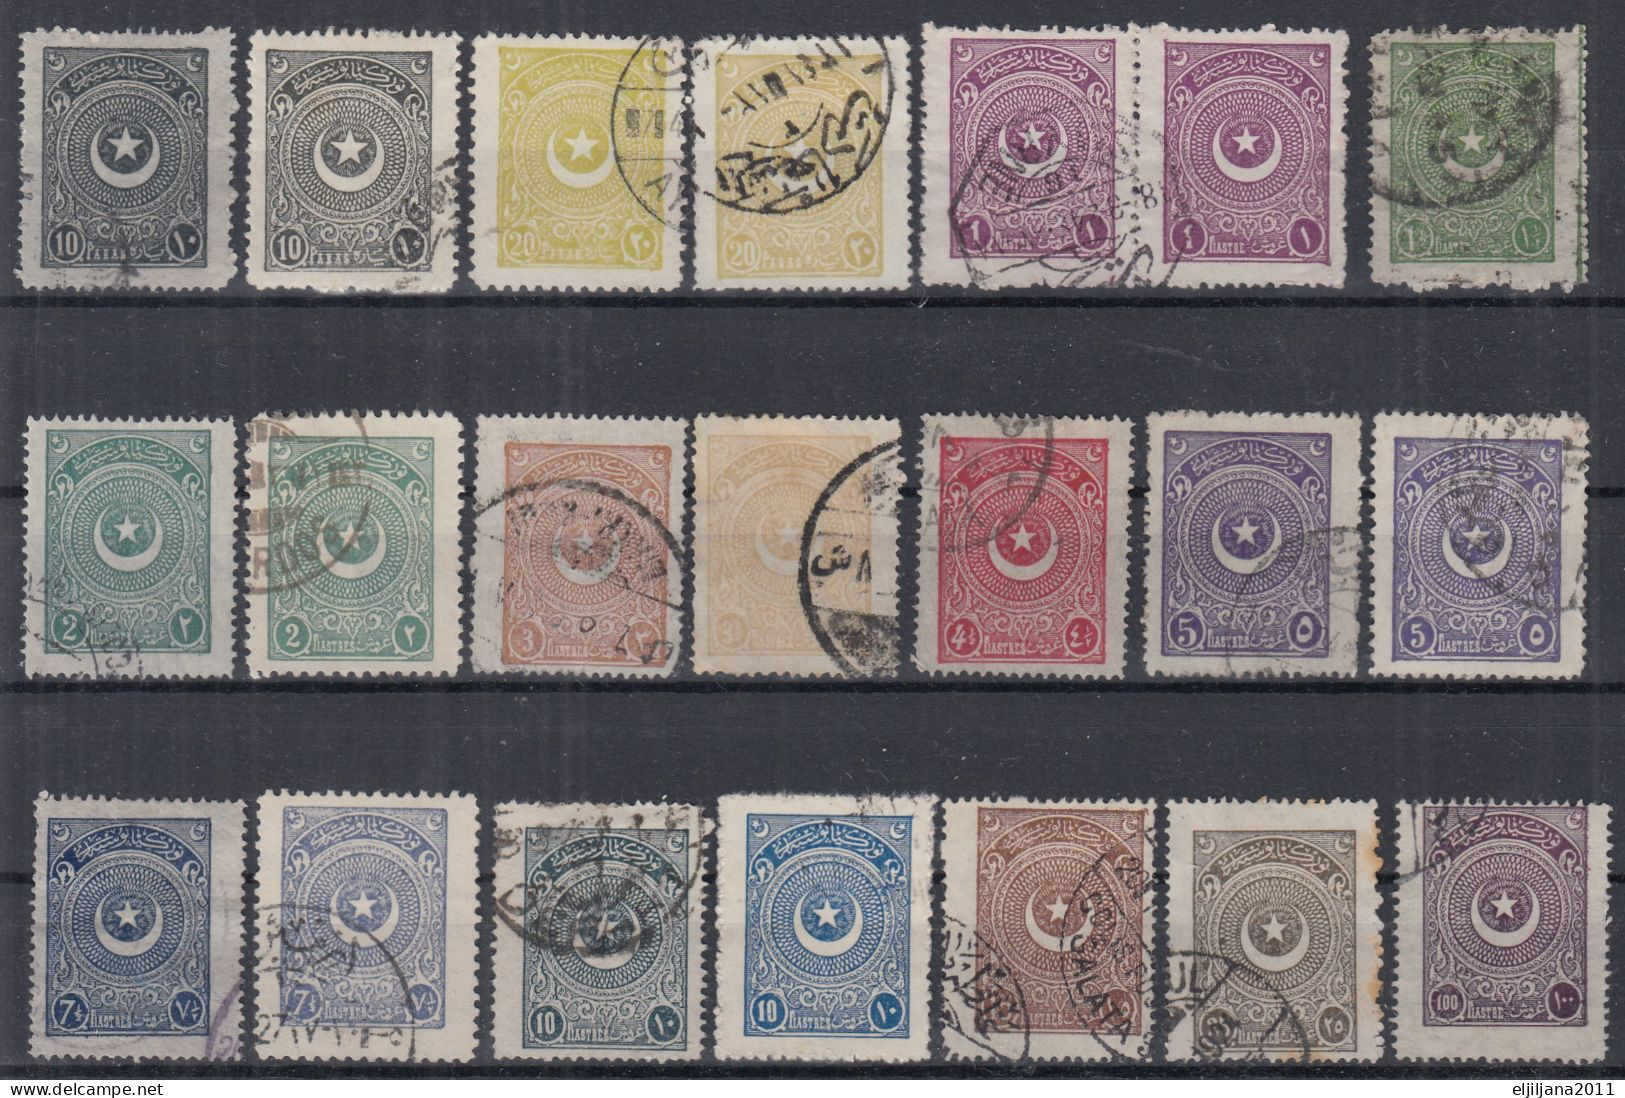 Action !! SALE !! 50 % Turkey / Türkei 1923 - 1925 ⁕ Star And Crescent In A Circle ⁕ 21v Used / Shades - Different Perf. - Usati